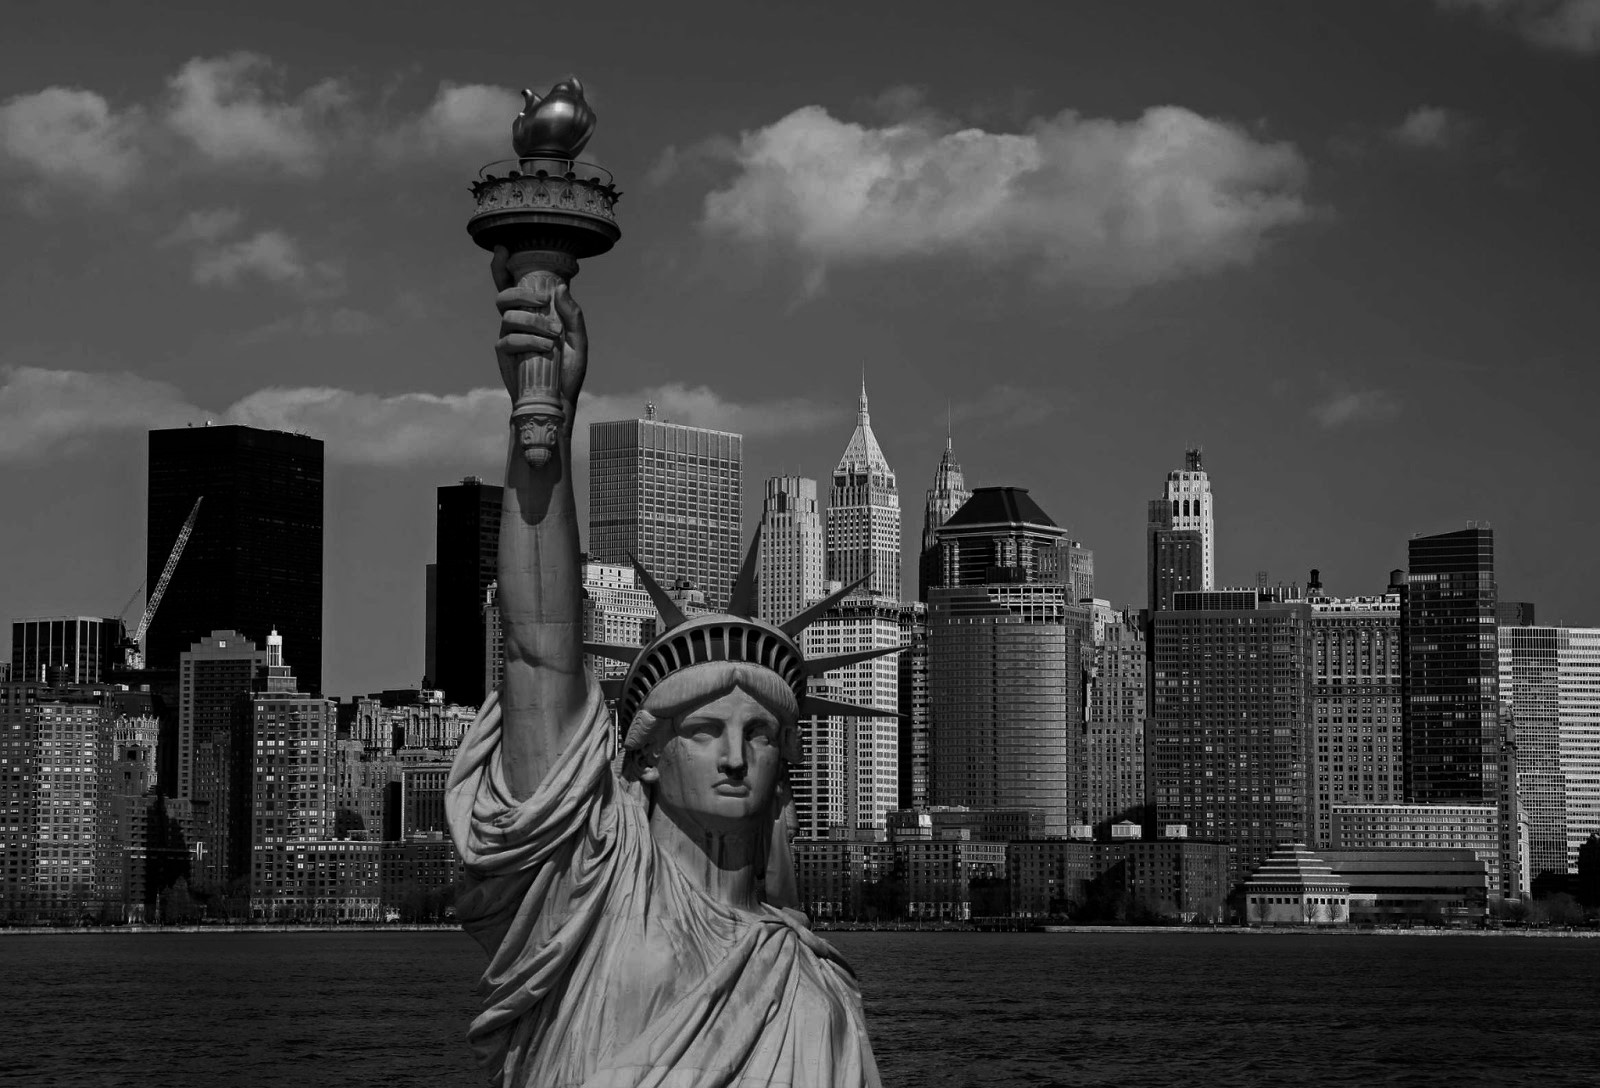 Image of Statue Of Liberty In NYC